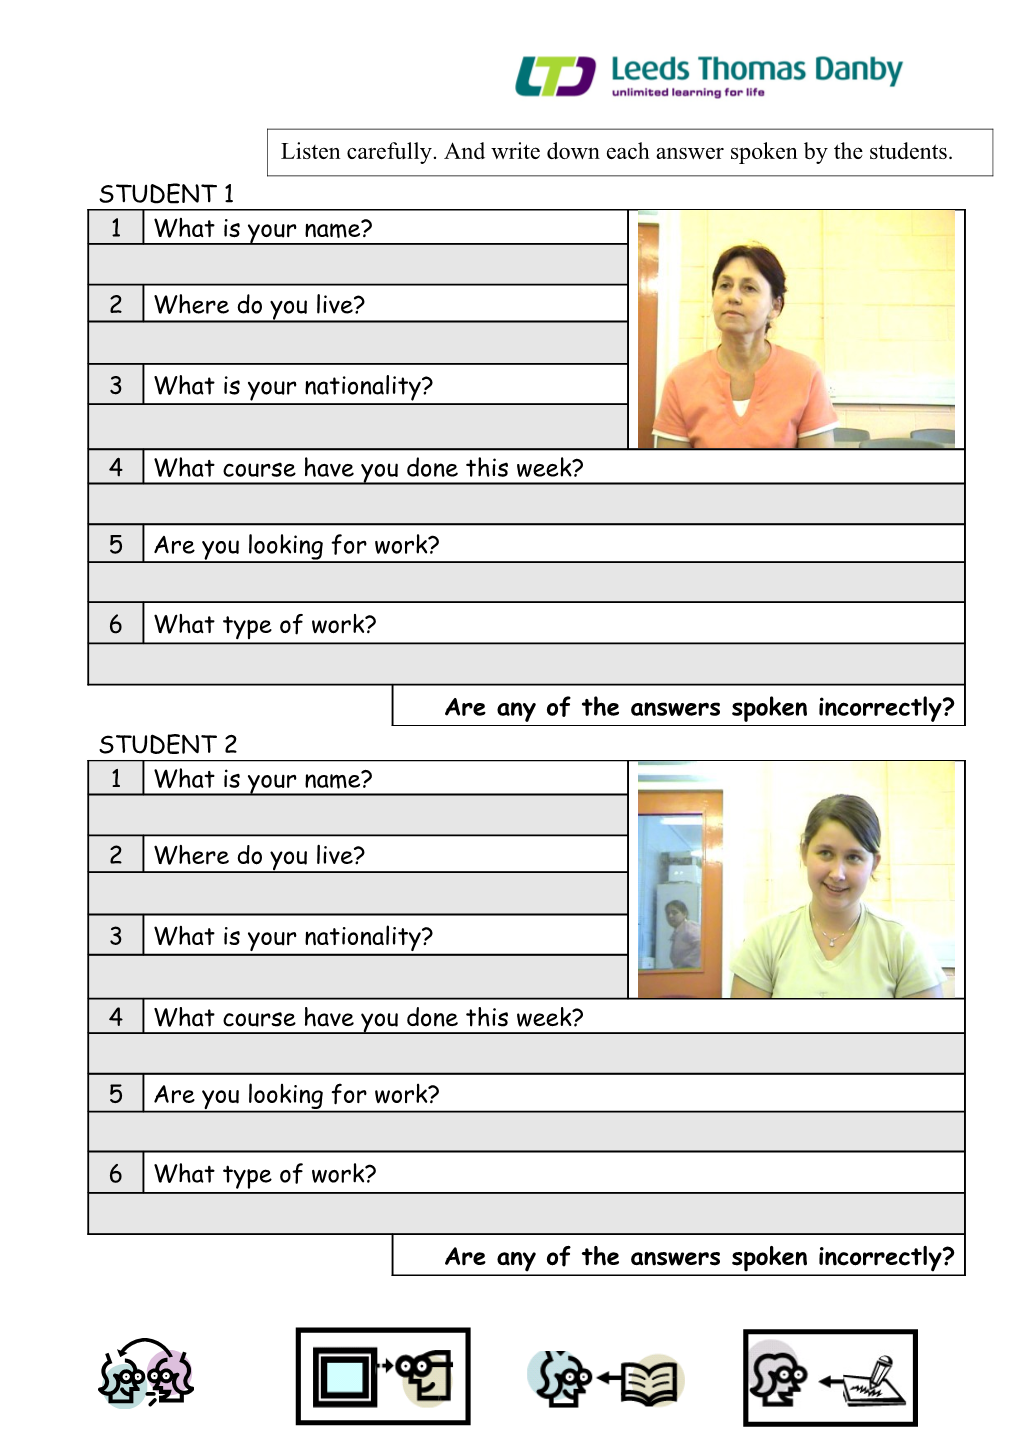 1.Distribute Worksheets and Watch Video, Asking Students to Listen Carefully and Write